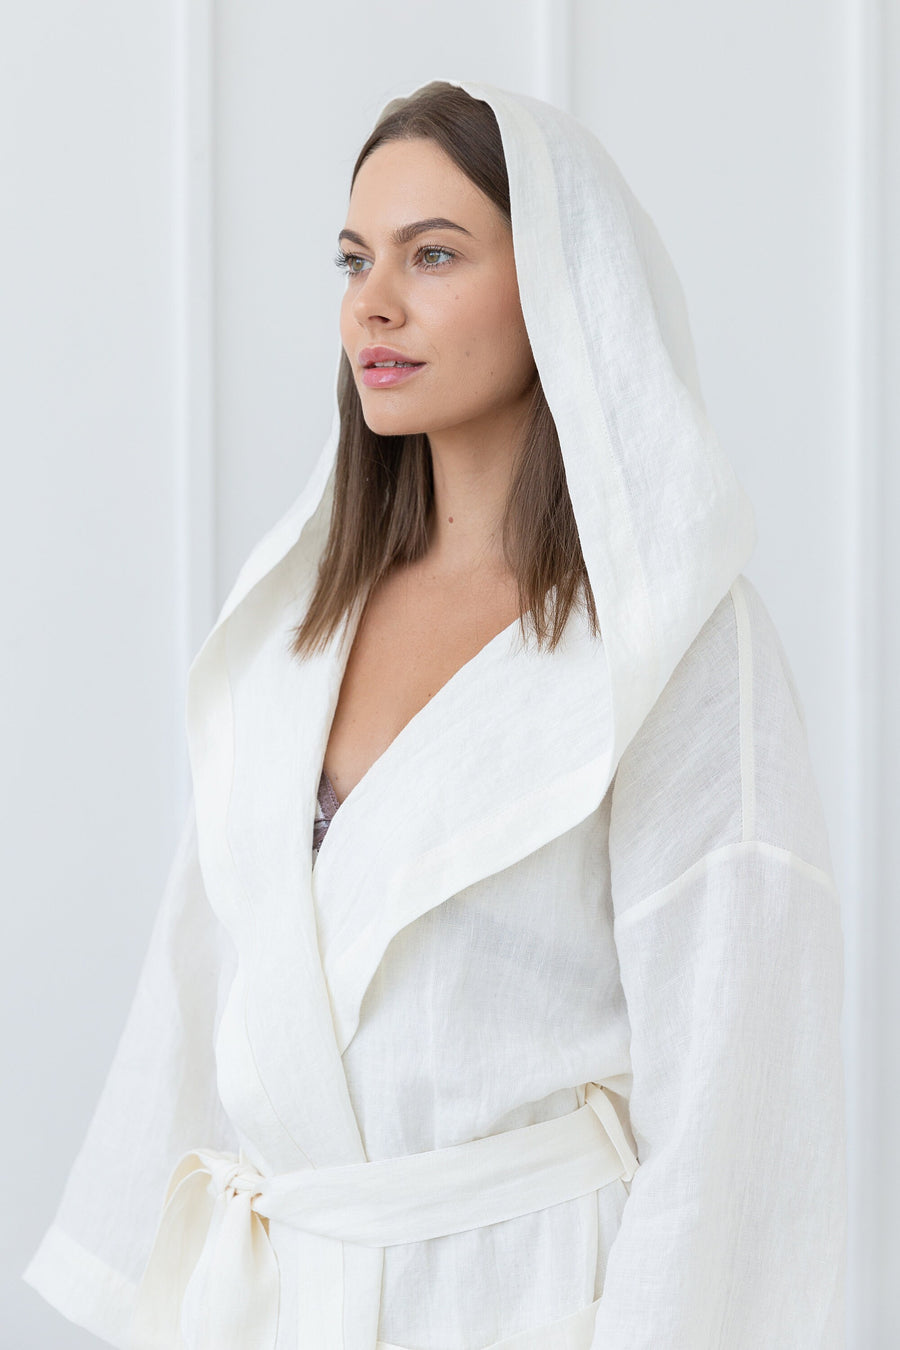 White Linen Bathrobe with Hoodie, Luxury Bathrobe with Hoodie, Classic Bathrobe, Sauna Robe, Linen Spa Robe, Linen Gown, Gift for Her/Him - Linen Couture Boutique